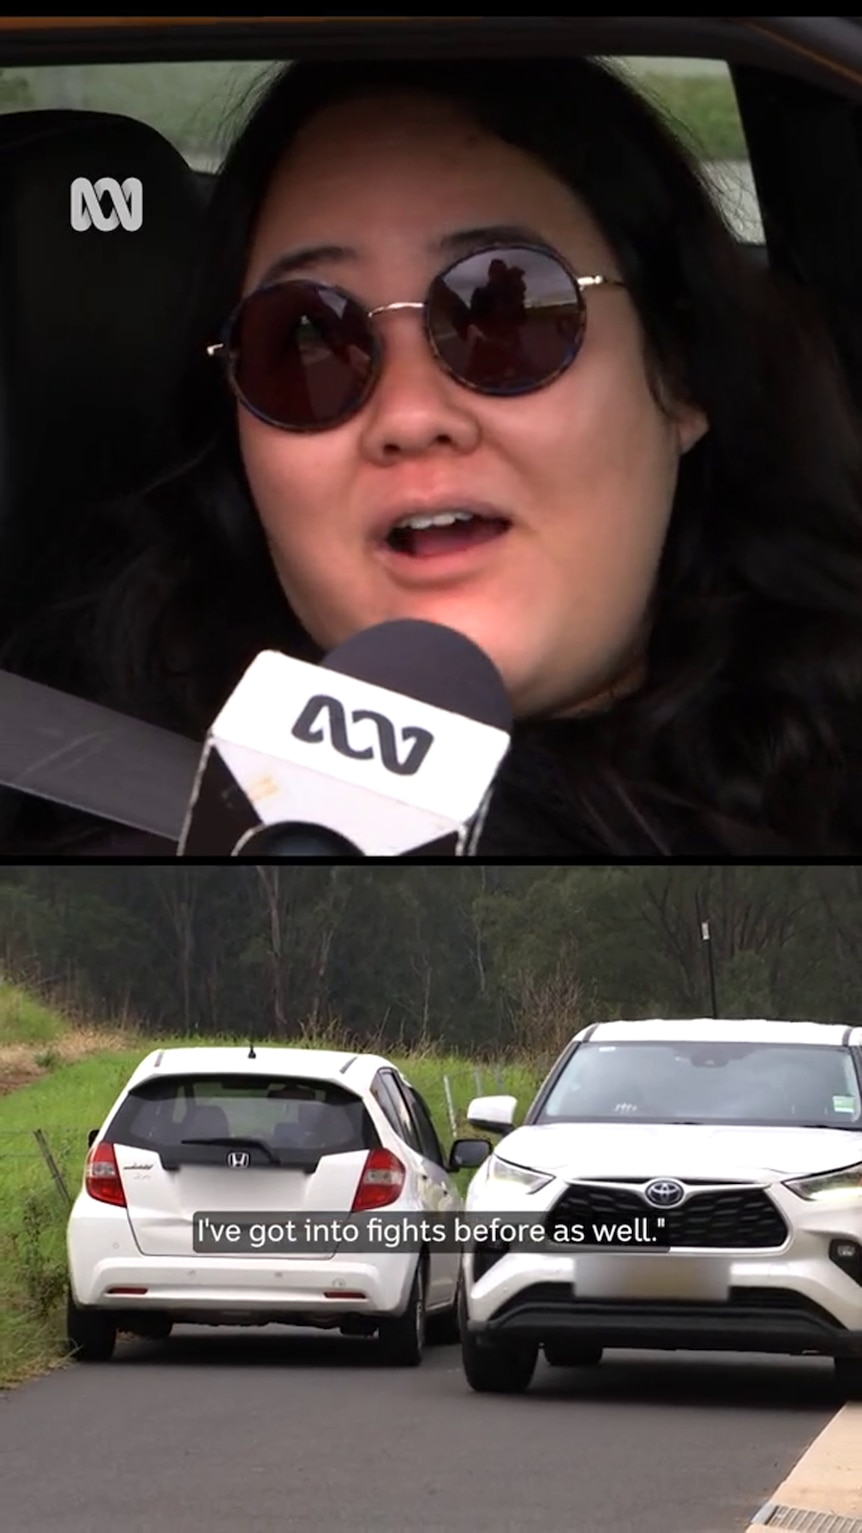 Composite image shows woman in car with ABC mic before her mouth and 2 cars face to face on narrow road